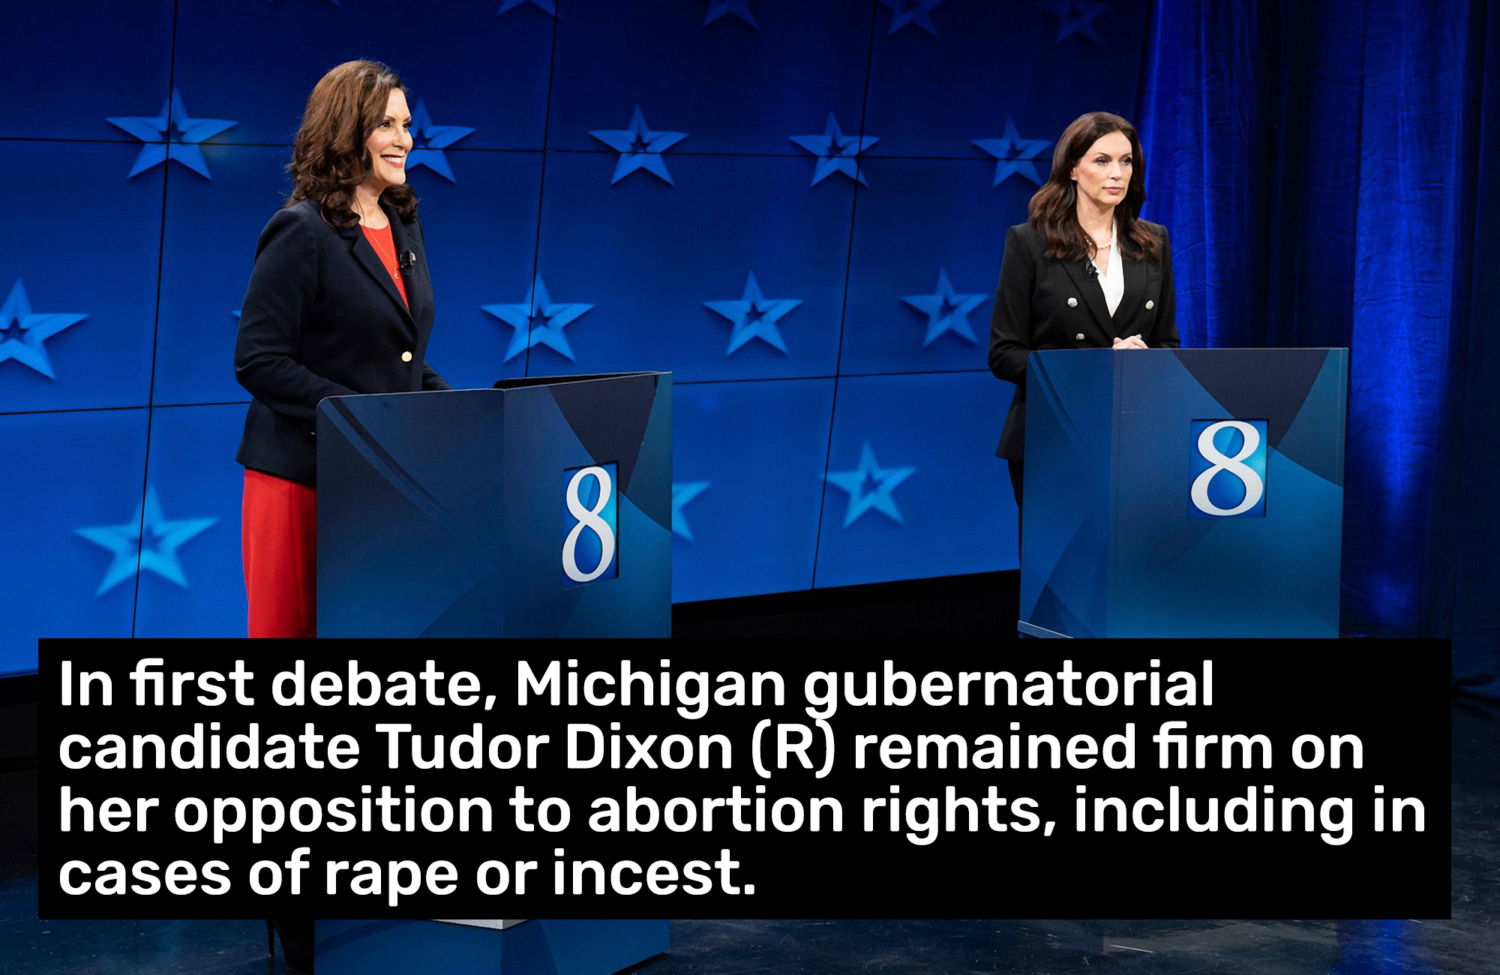 In first debate, Michigan gubernatorial candidate Tudor Dixon (R) remained firm on her opposition to abortion rights, including in cases of rape or incest.